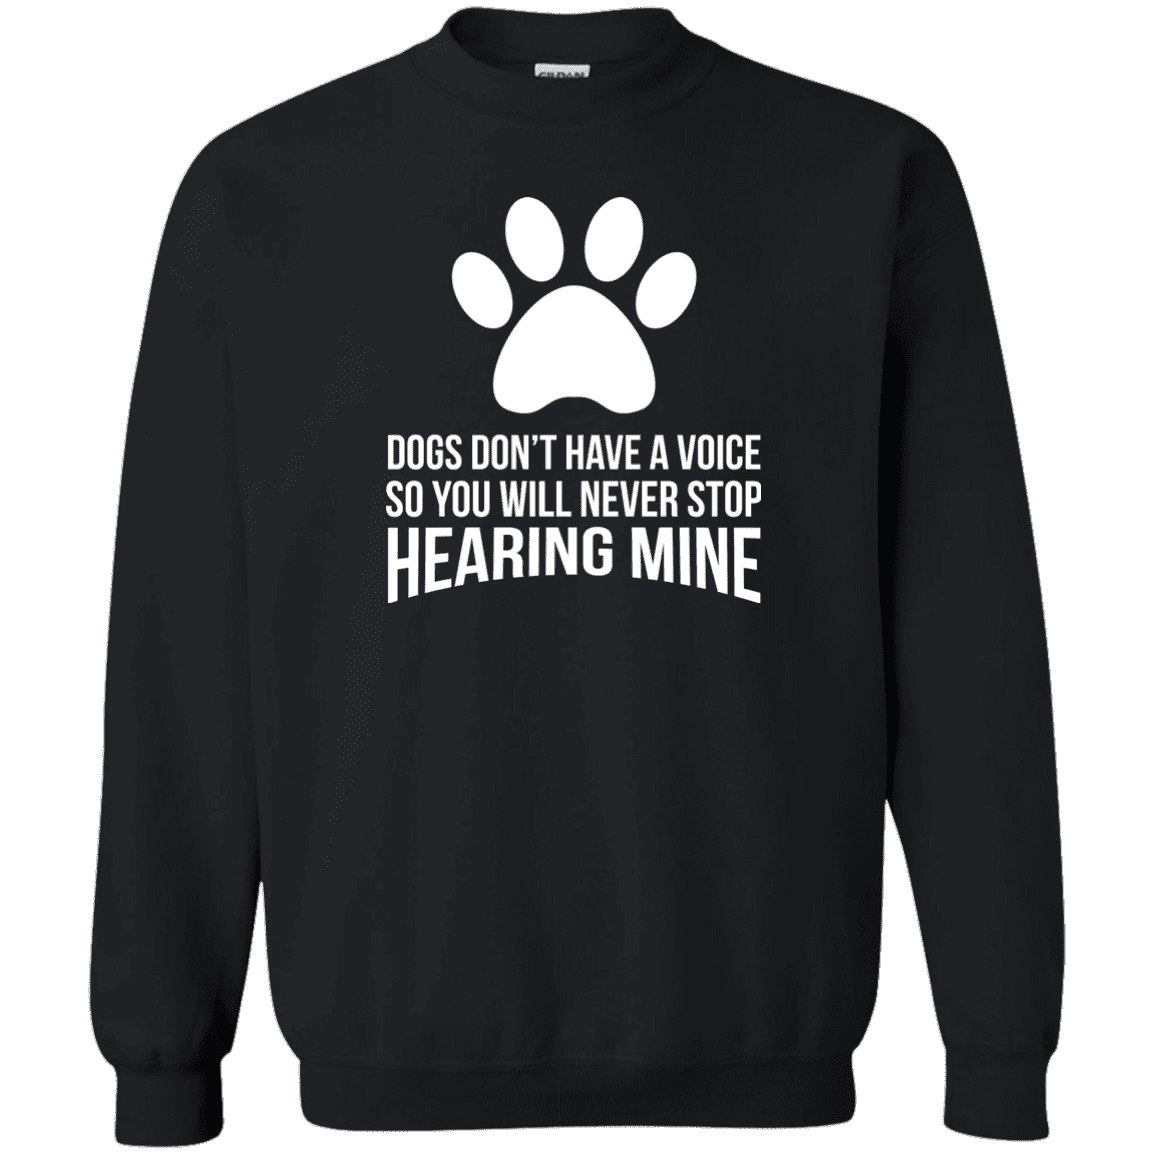 Dogs Don't Have A Voice - Sweatshirt.